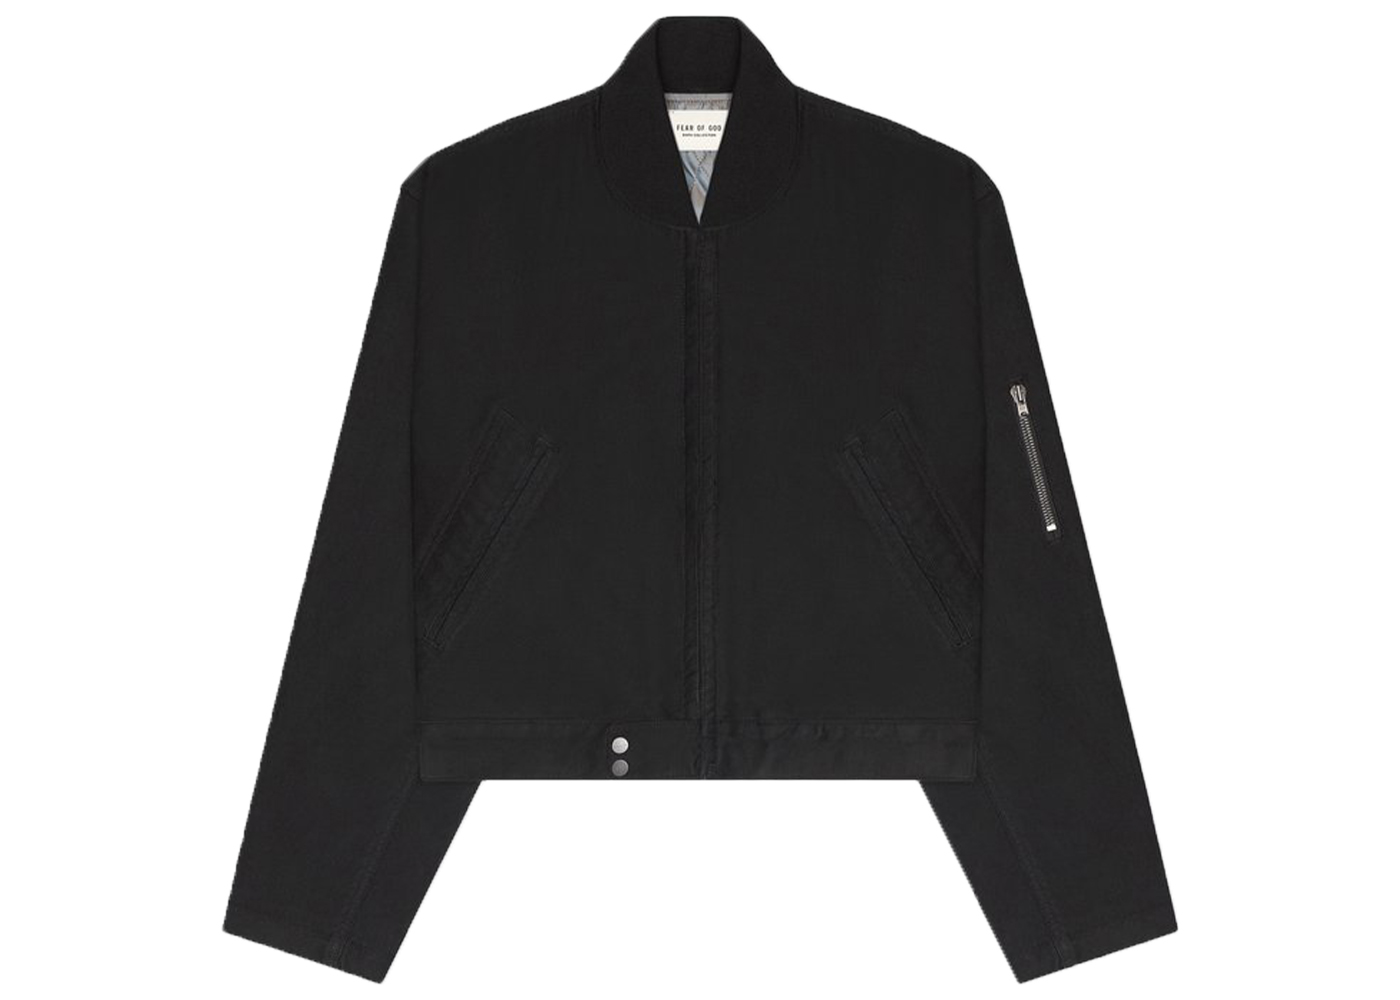 FEAR OF GOD 6th Cotton Bomber Jacket